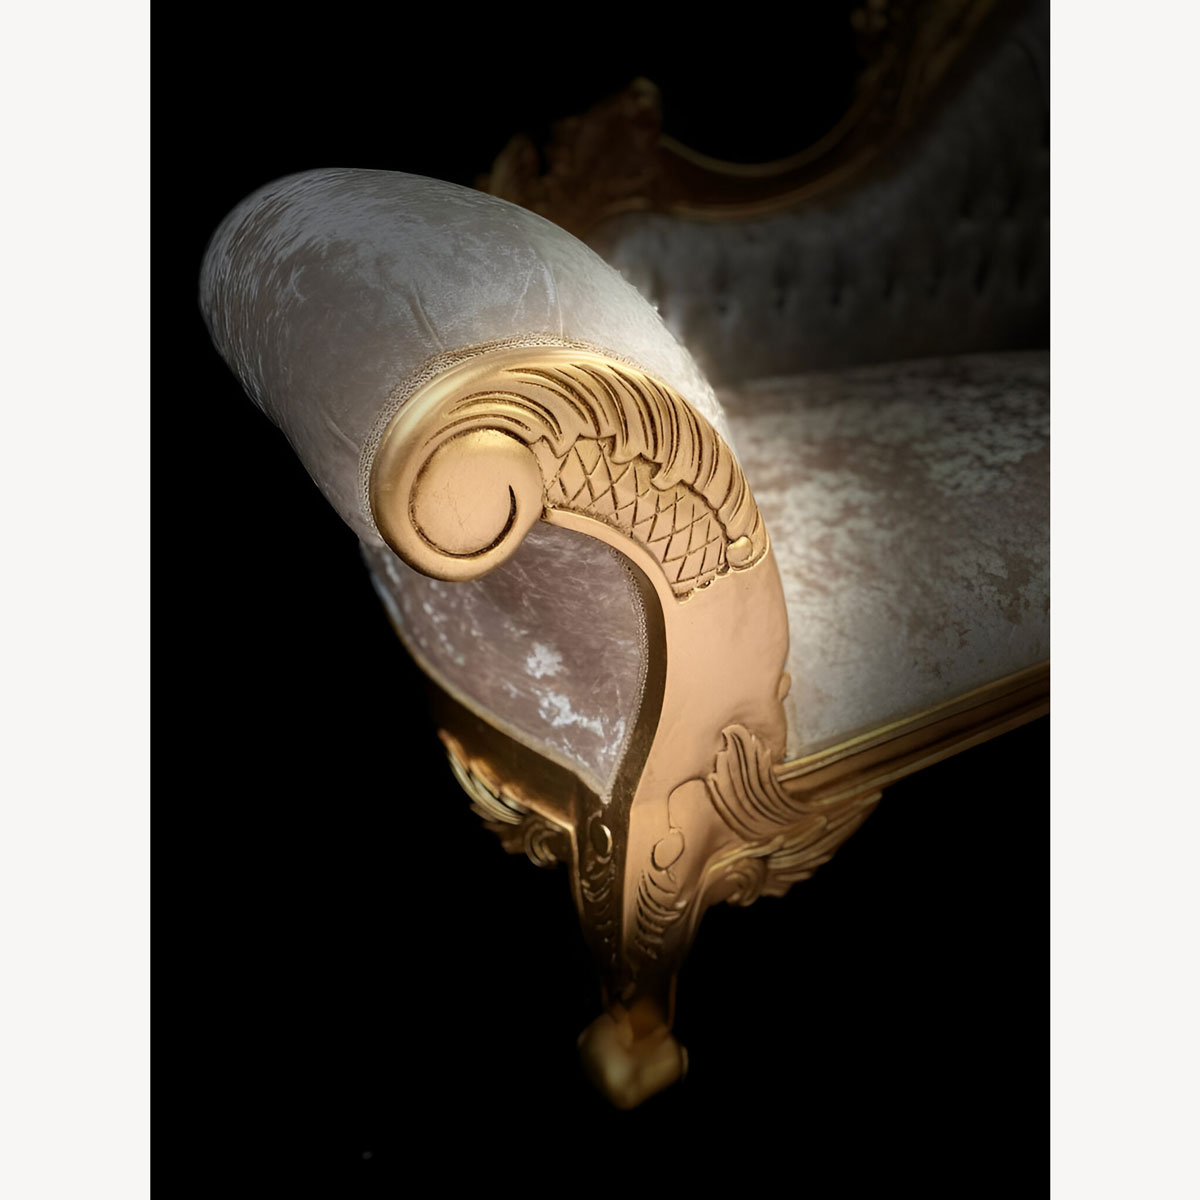 Chaise Hampshire Sofa In Gold Leaf Frame Upholstered In Ivory Cream Crushed Velvet With Crystal Buttoning 4 - Hampshire Barn Interiors - Chaise Hampshire Sofa In Gold Leaf Frame Upholstered In Ivory Cream Crushed Velvet With Crystal Buttoning -